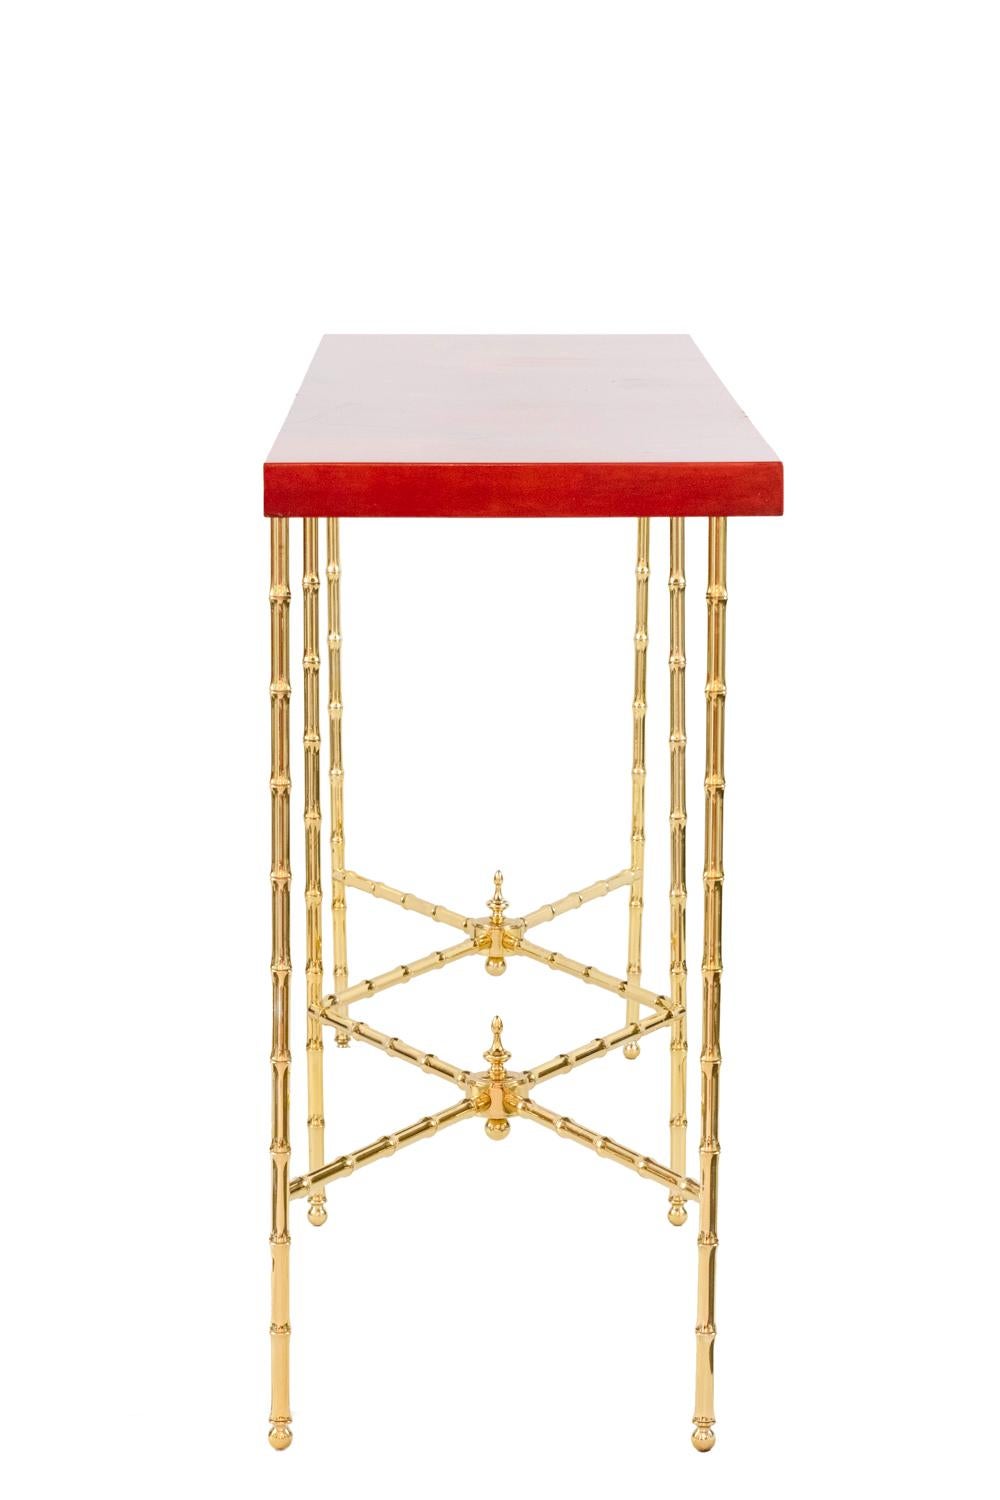 European Bernard Dunand, Console in Lacquer and Gilt Bronze, 1950s